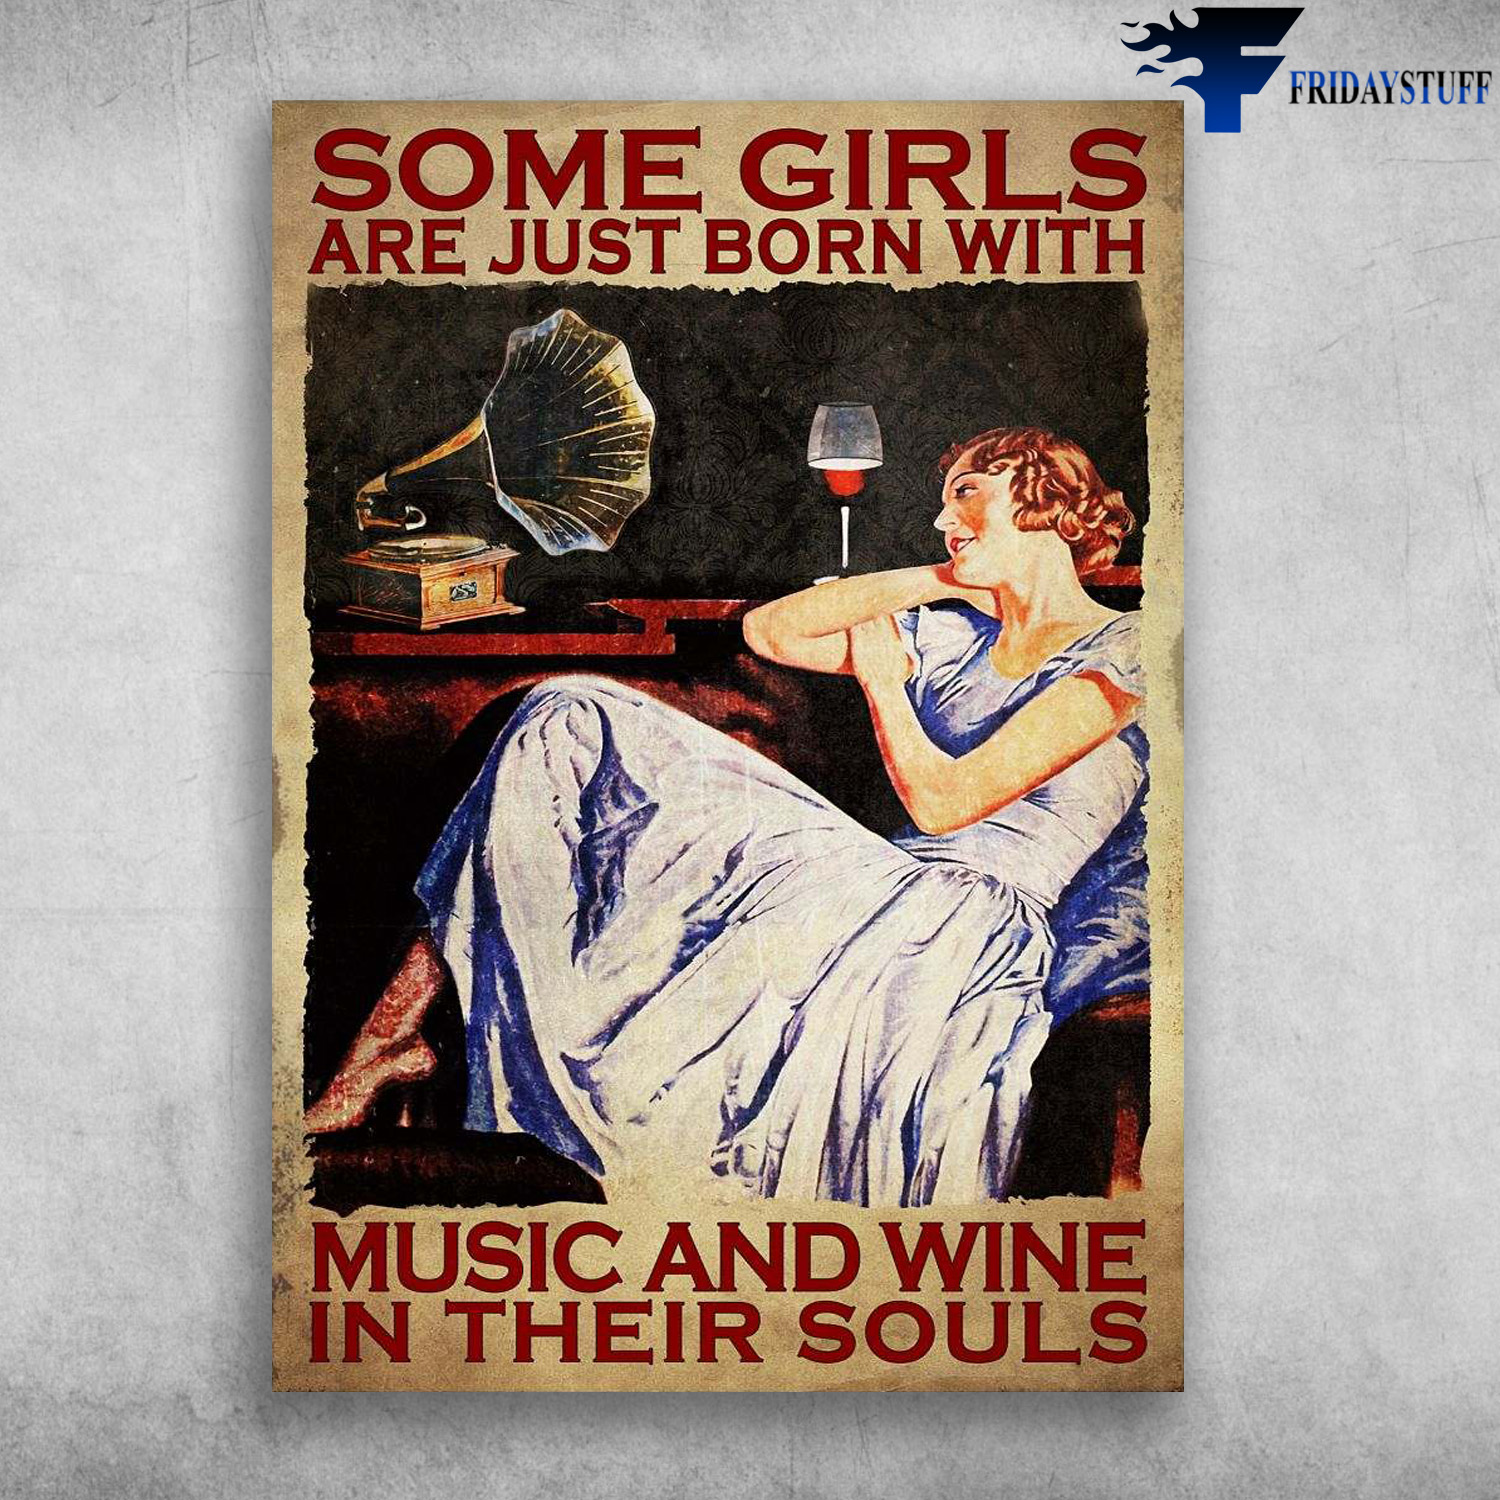 Girl Wine Vinyl - Some Girls Are Just Born With, Music And Wine, In Their Souls